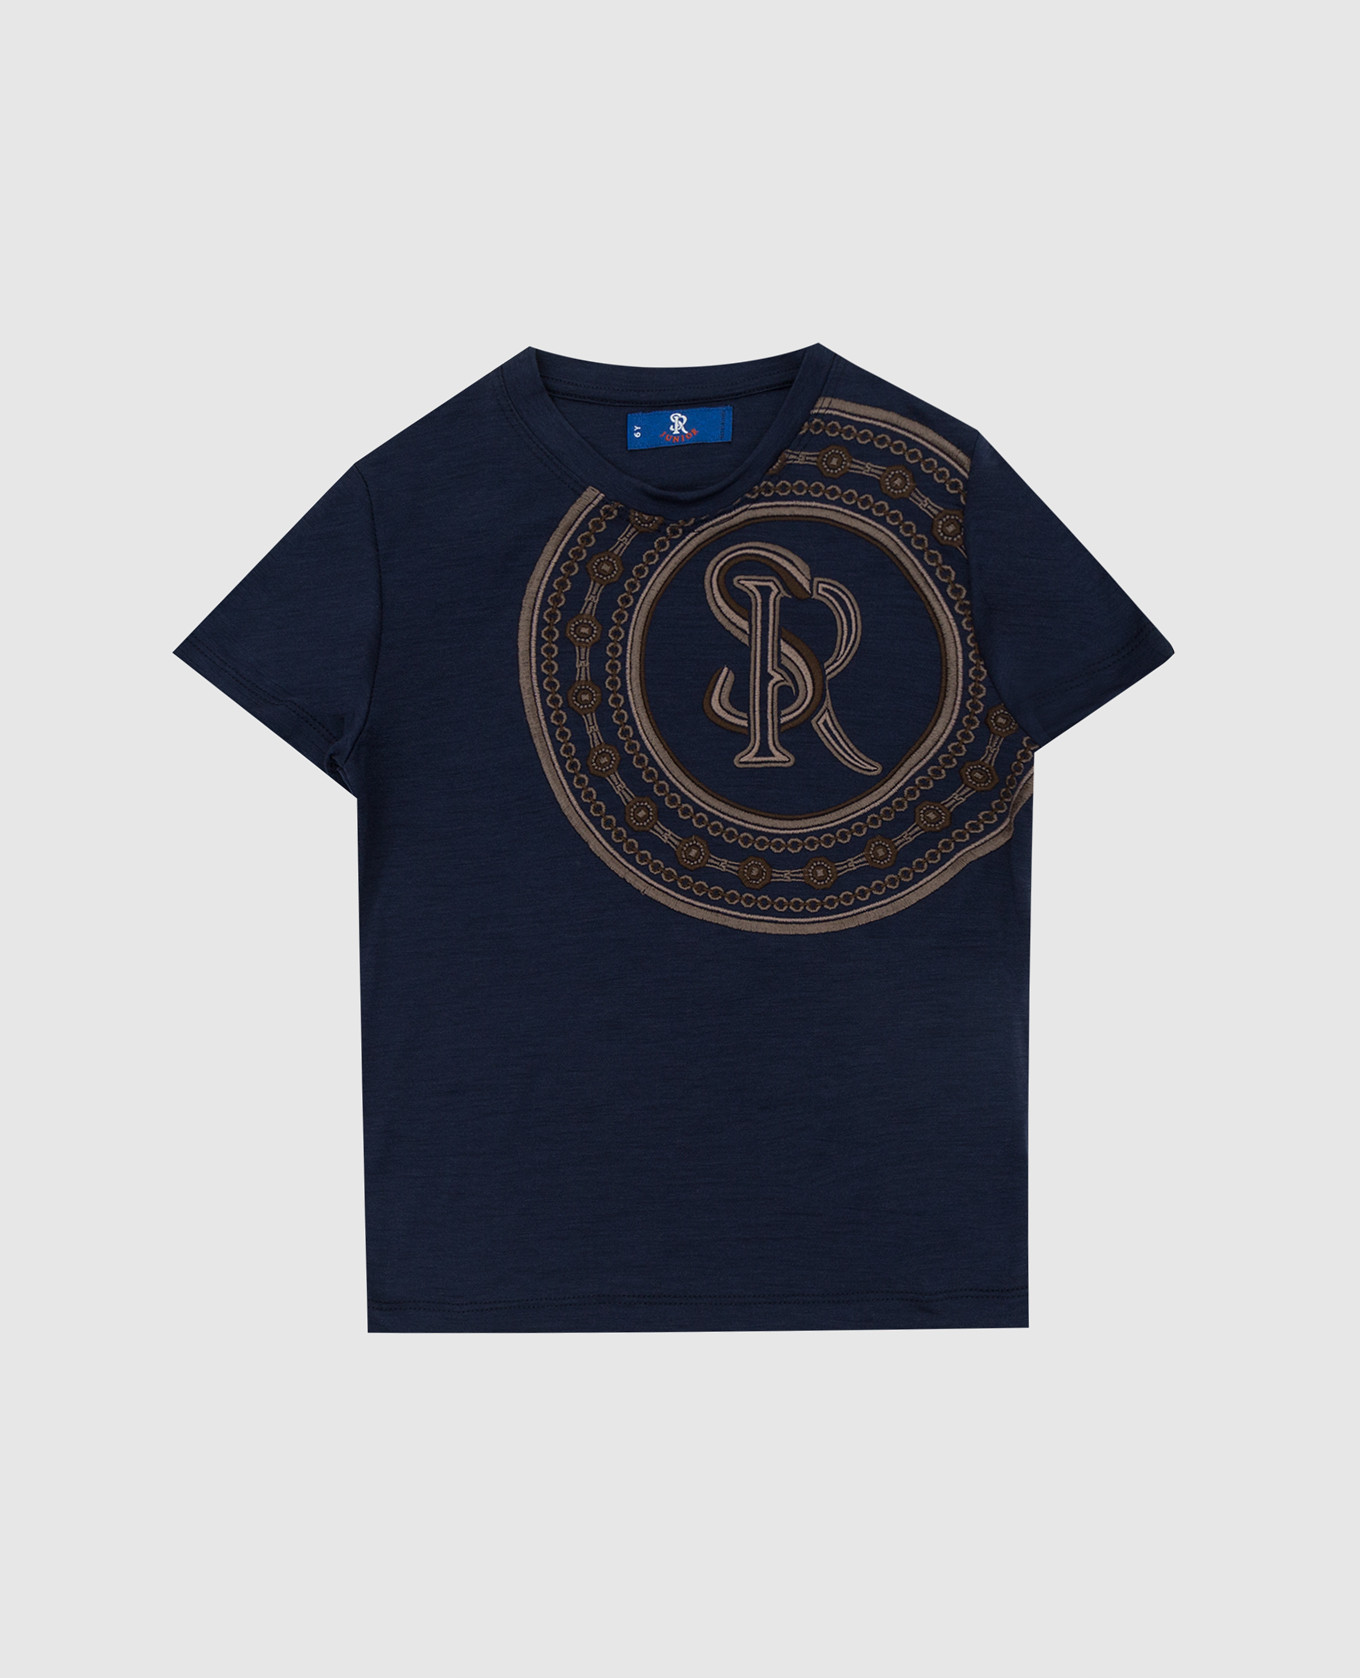 Children's T-shirt in wool with monogram embroidery